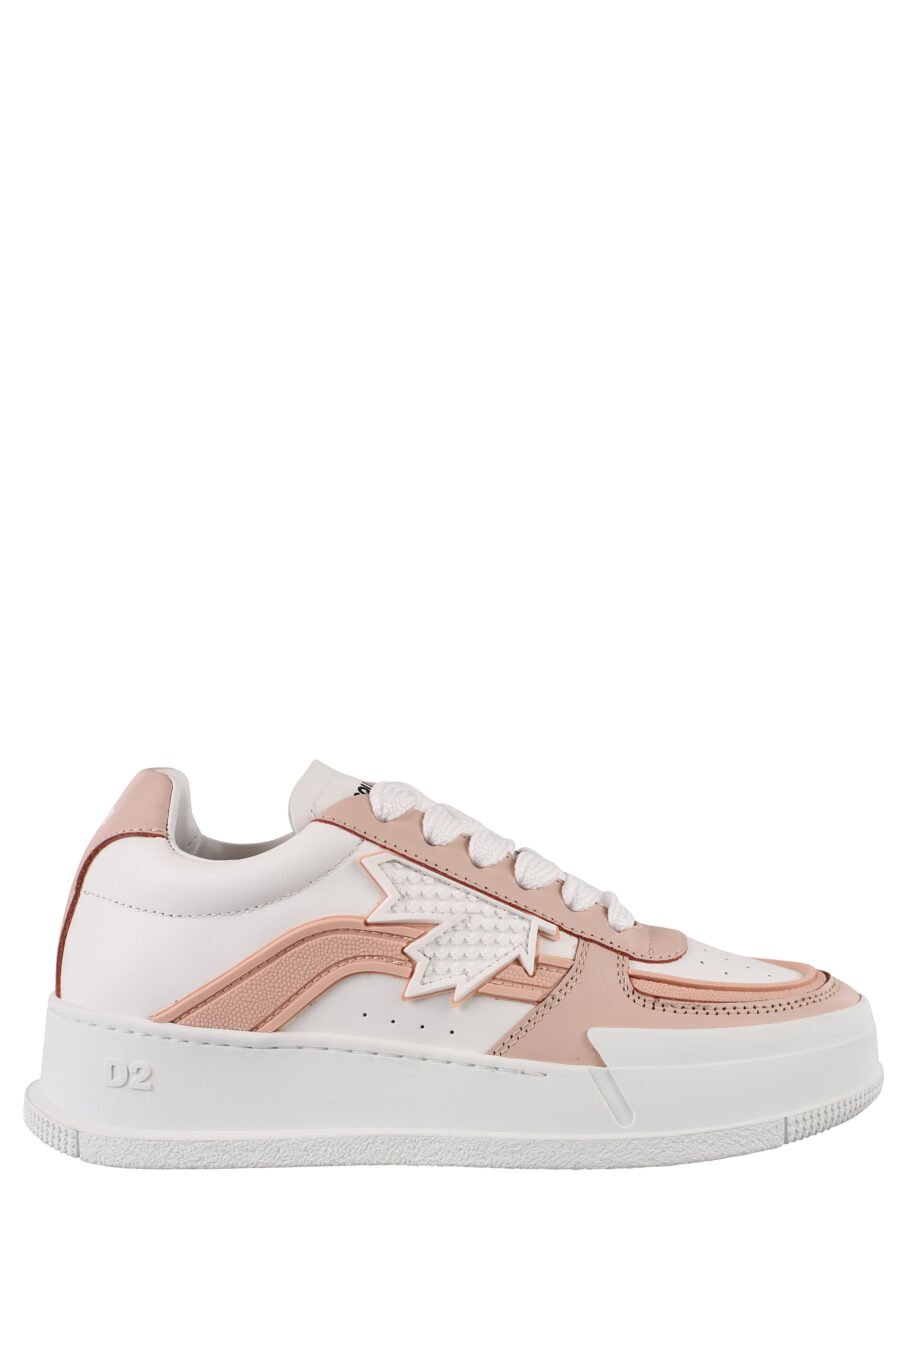 White platform trainers with pink detail - IMG 1174